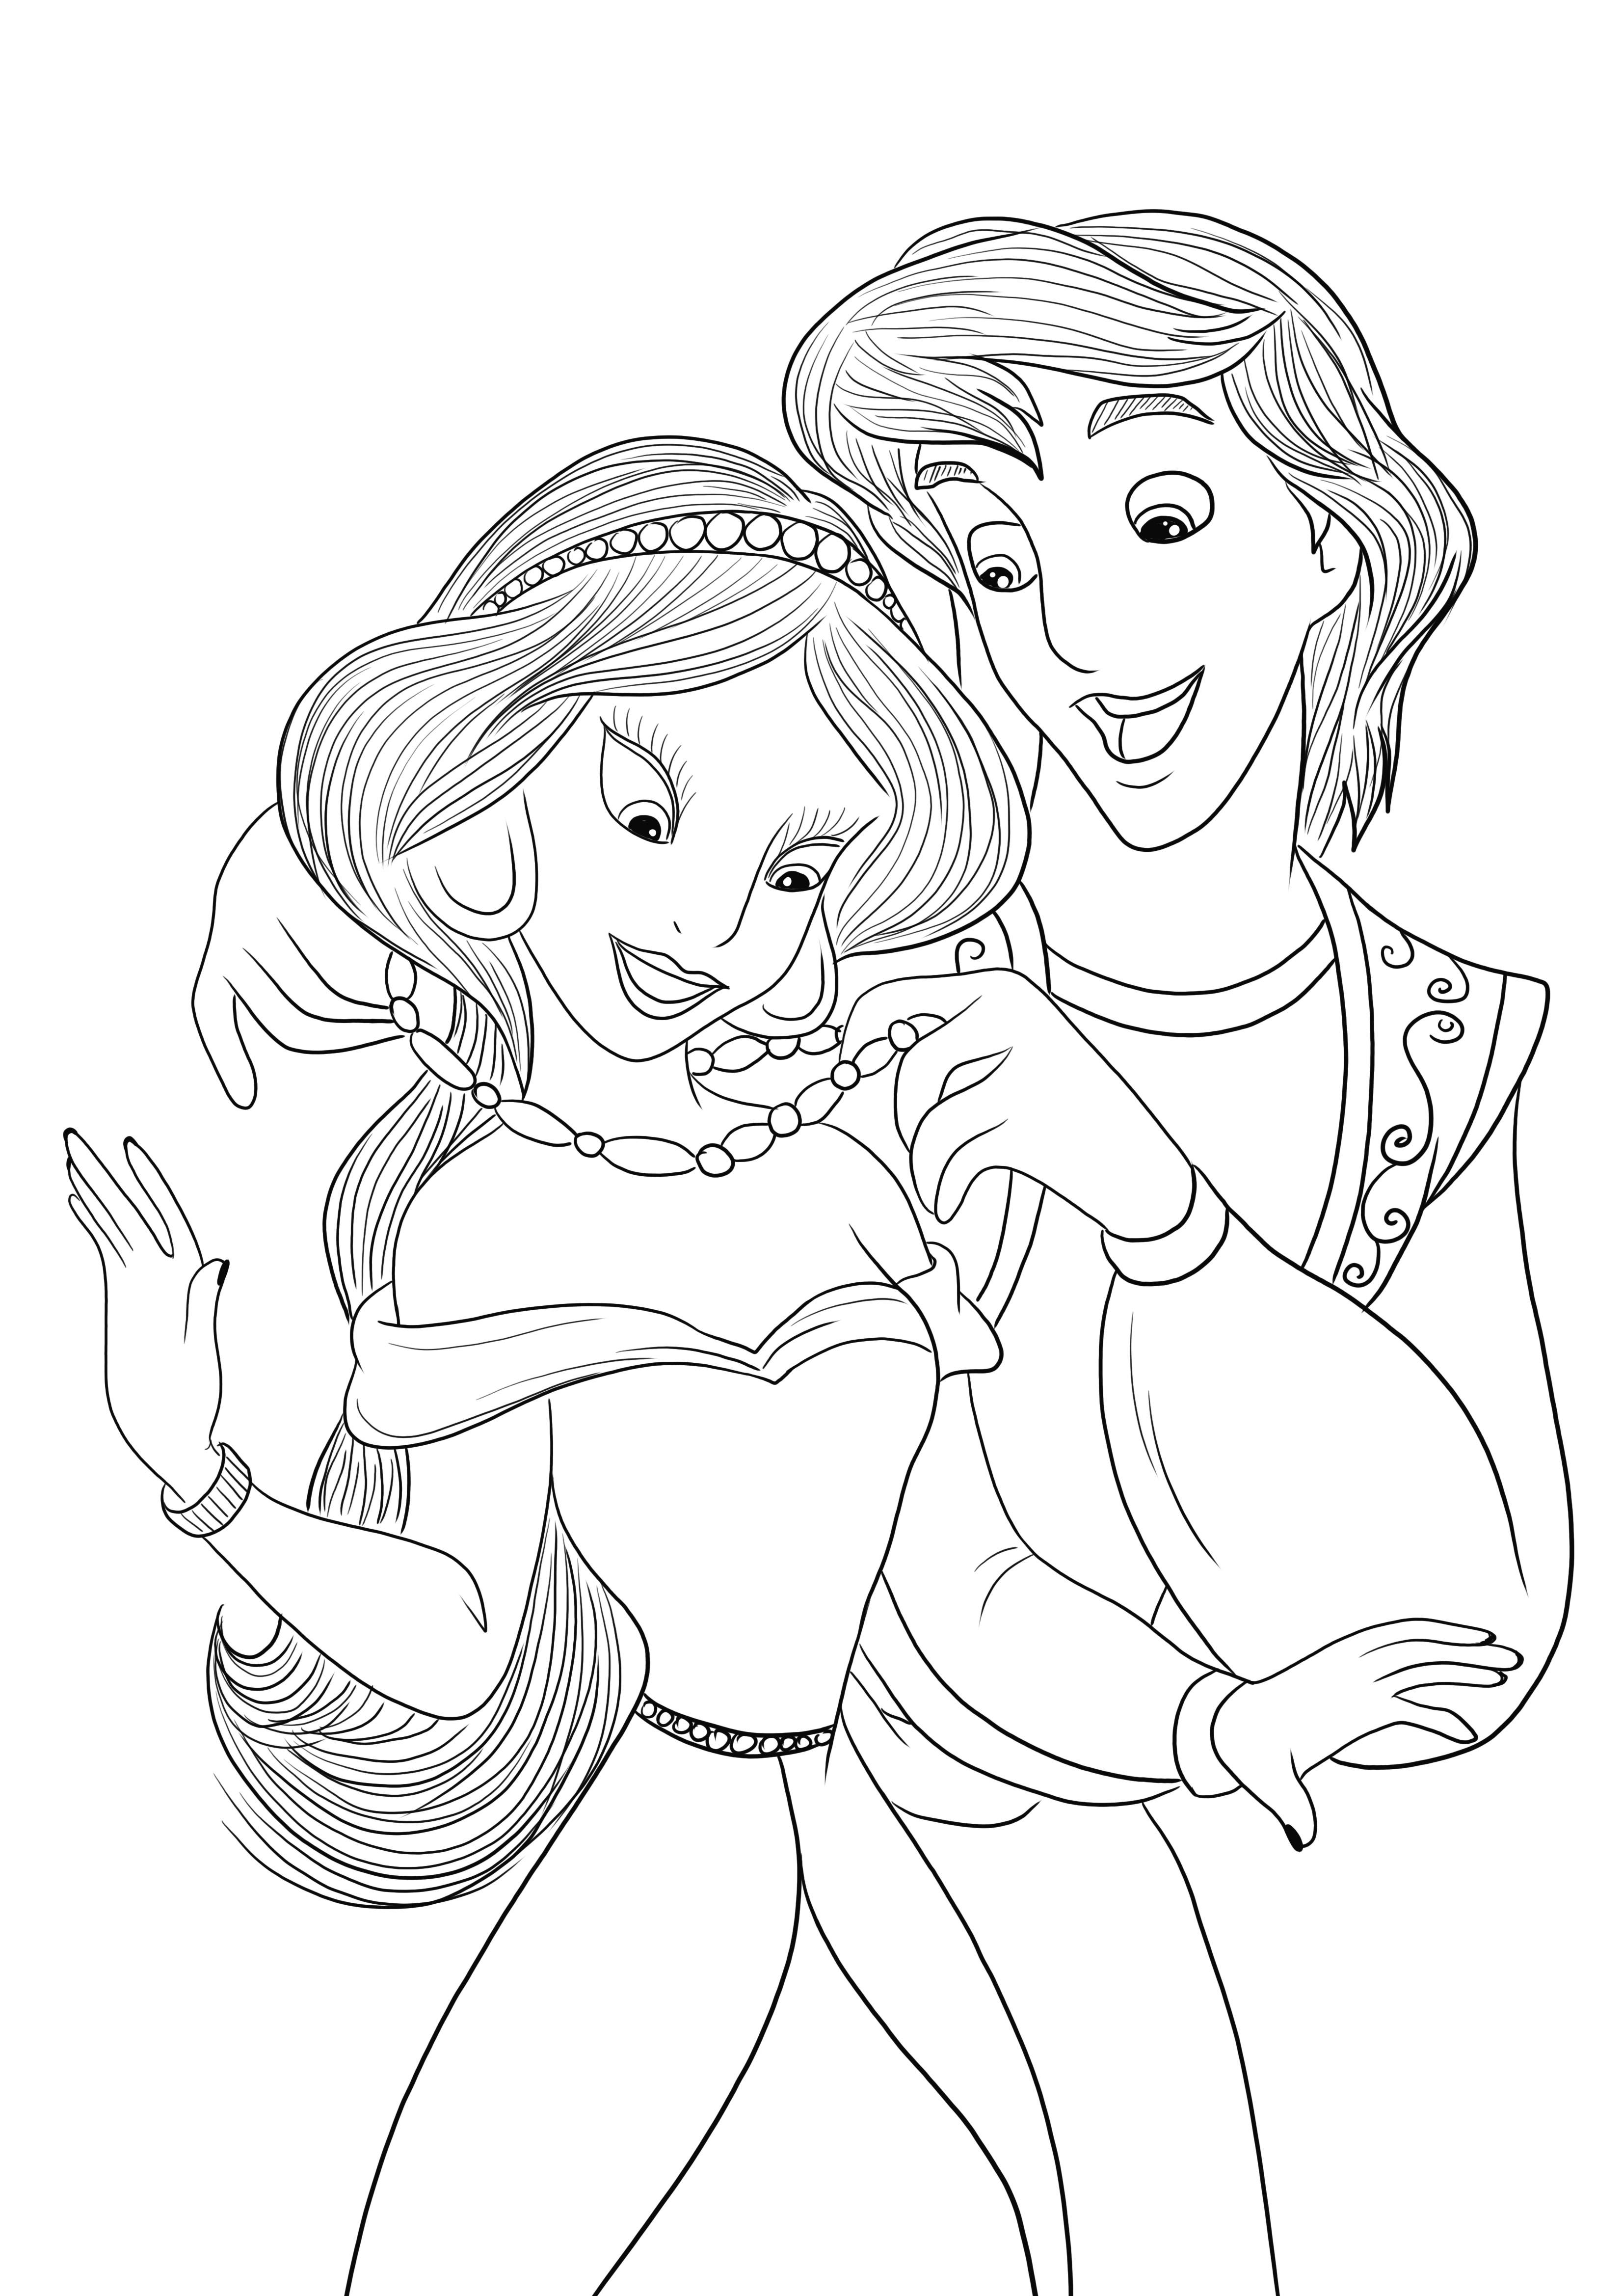 Free downloading of Aladdin and Jasmine coloring image for kids to color